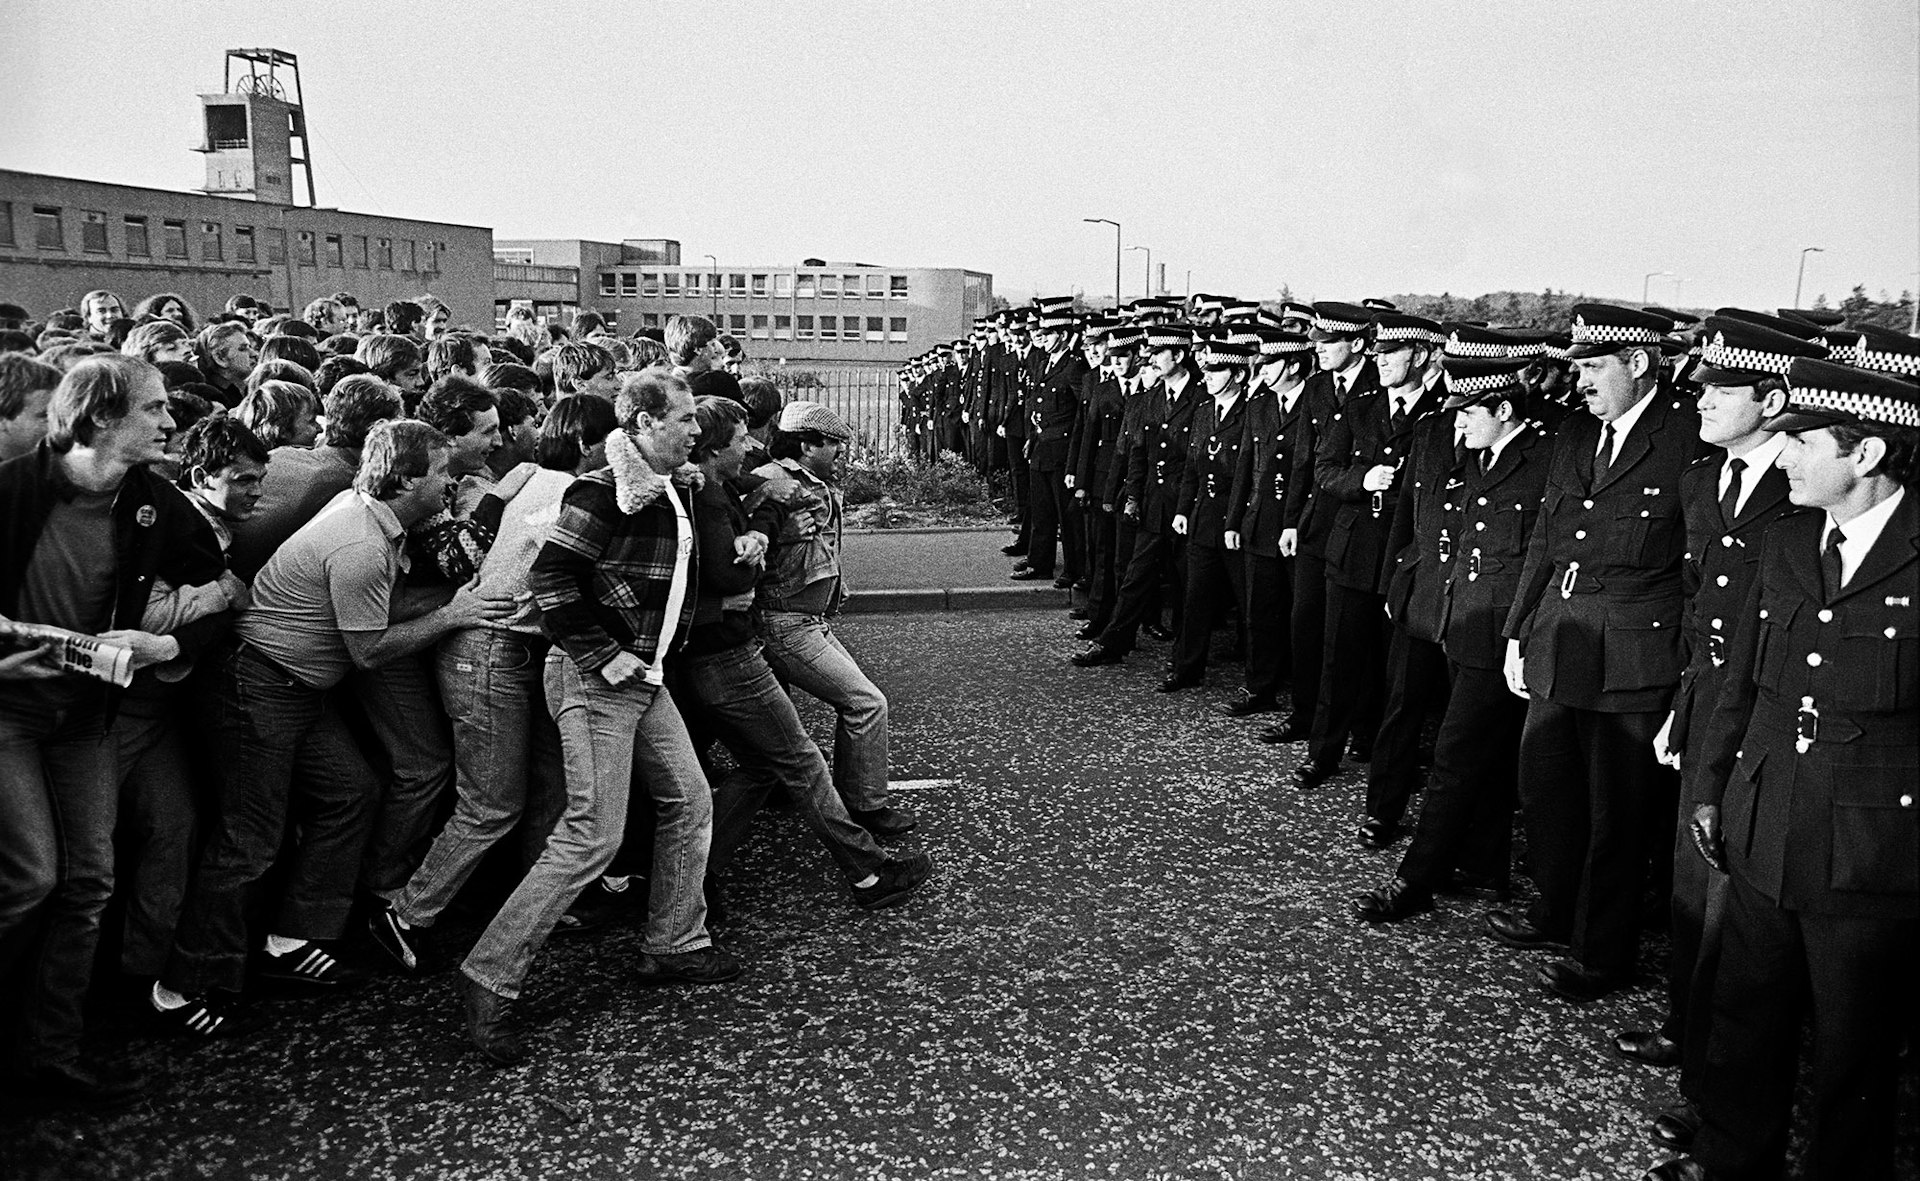 In Photos: The miners’ strike, 40 years on